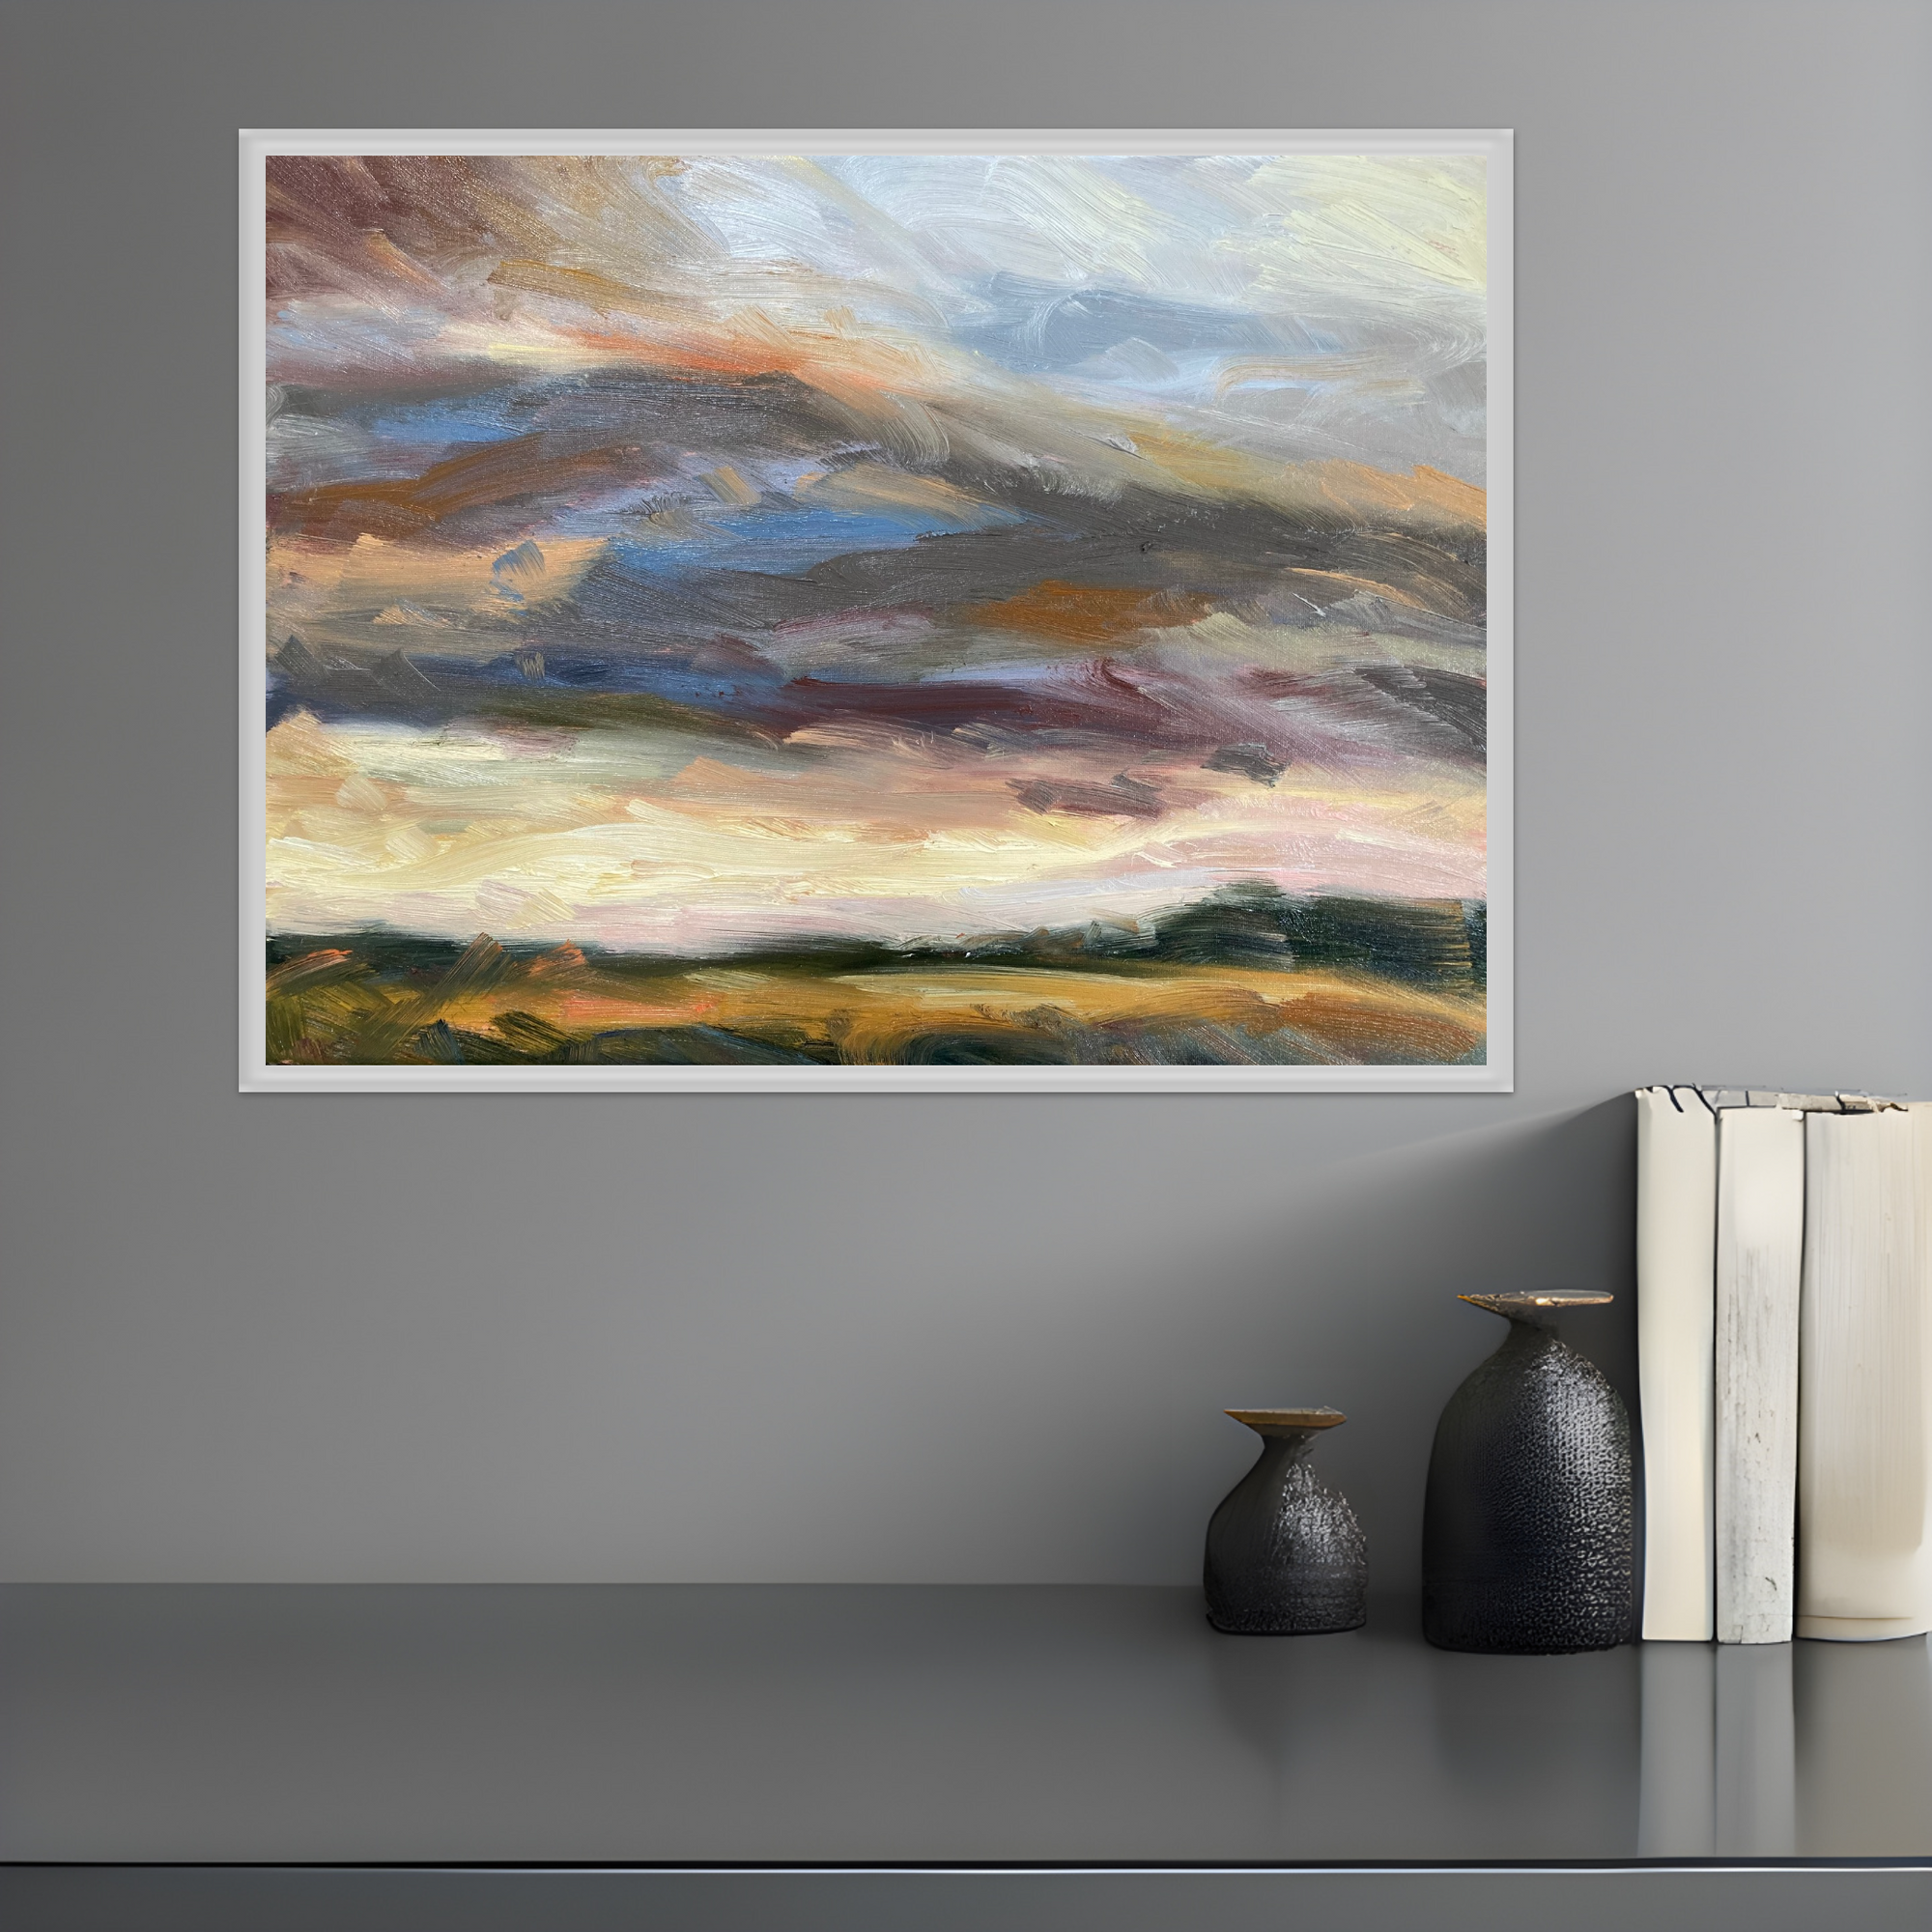 Blustery Day In Autumn Original Oil Landscape Painting In Room Setting 3